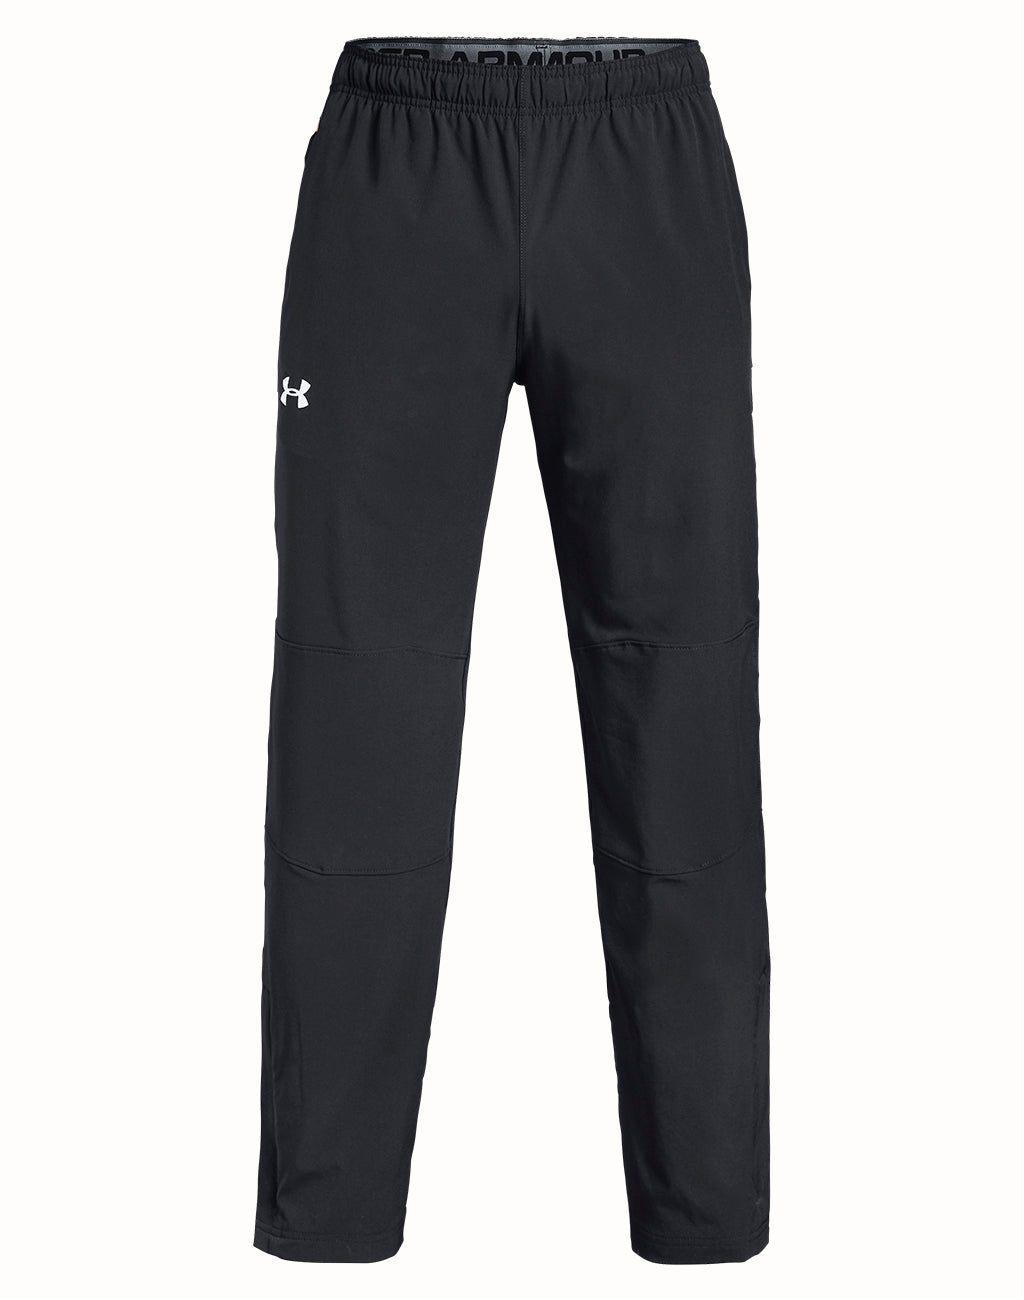 Men's Under Armour Hockey Warm Up Pant | Brand name clothing and ...